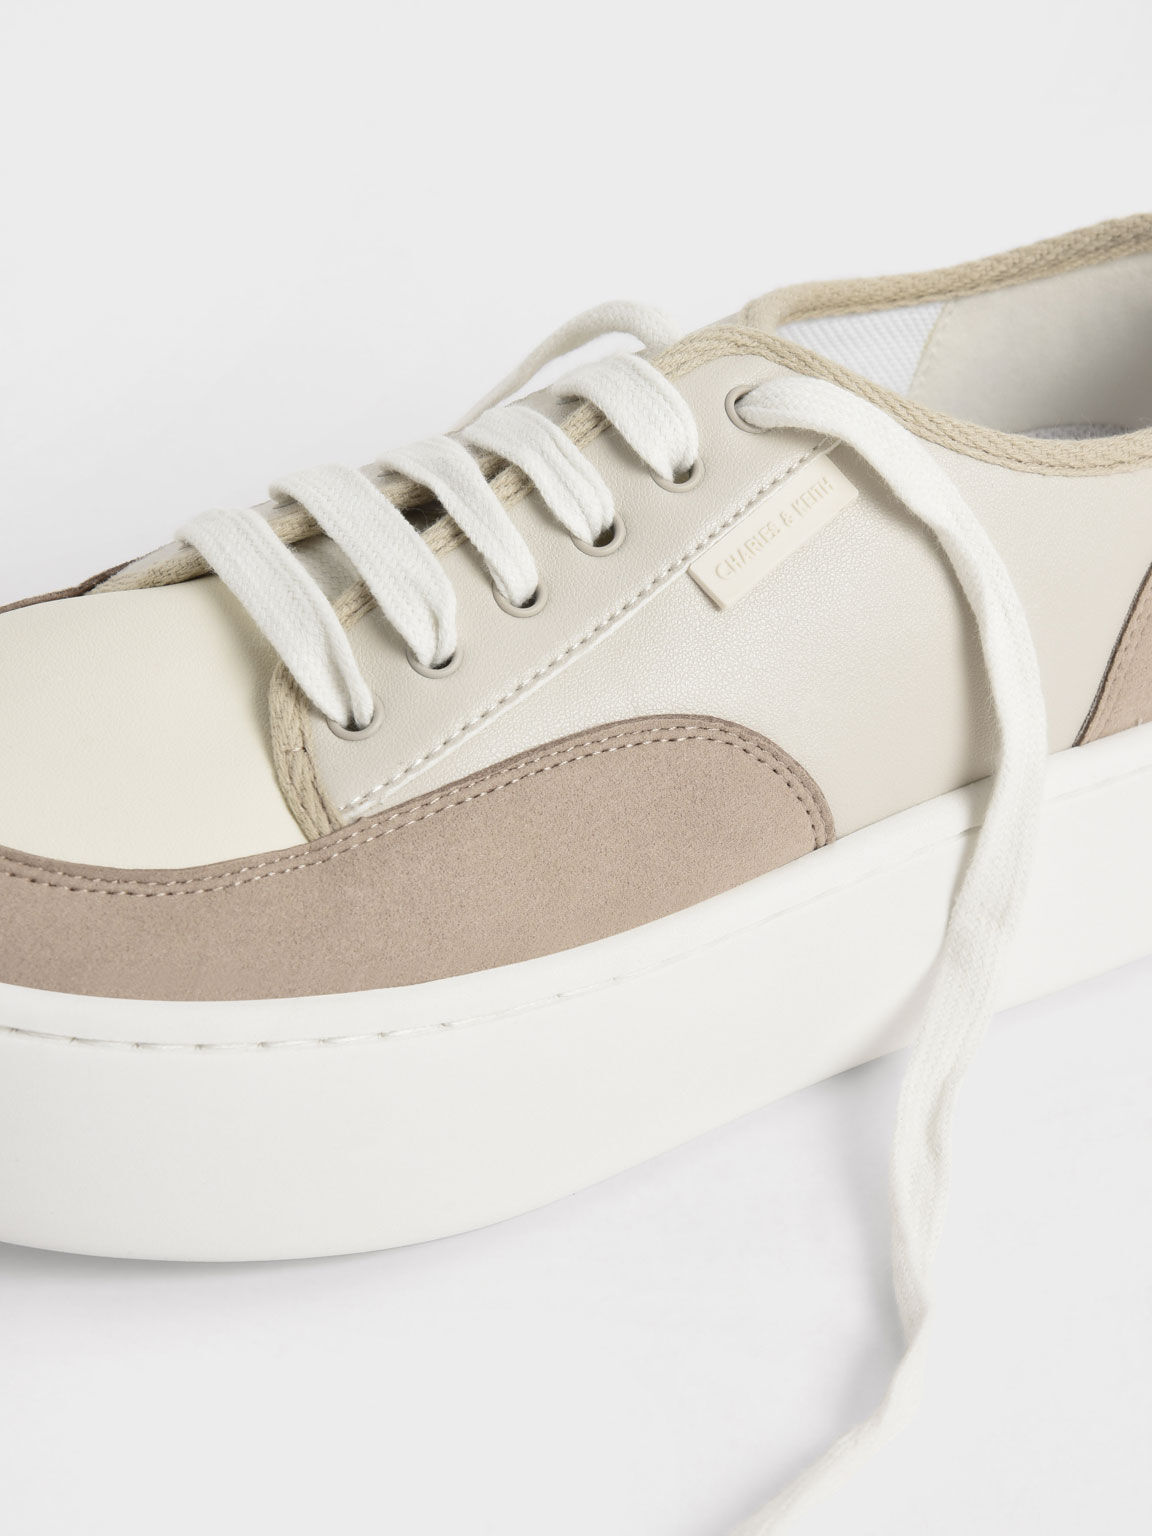 Skye Two-Tone Cotton Sneakers, Taupe, hi-res